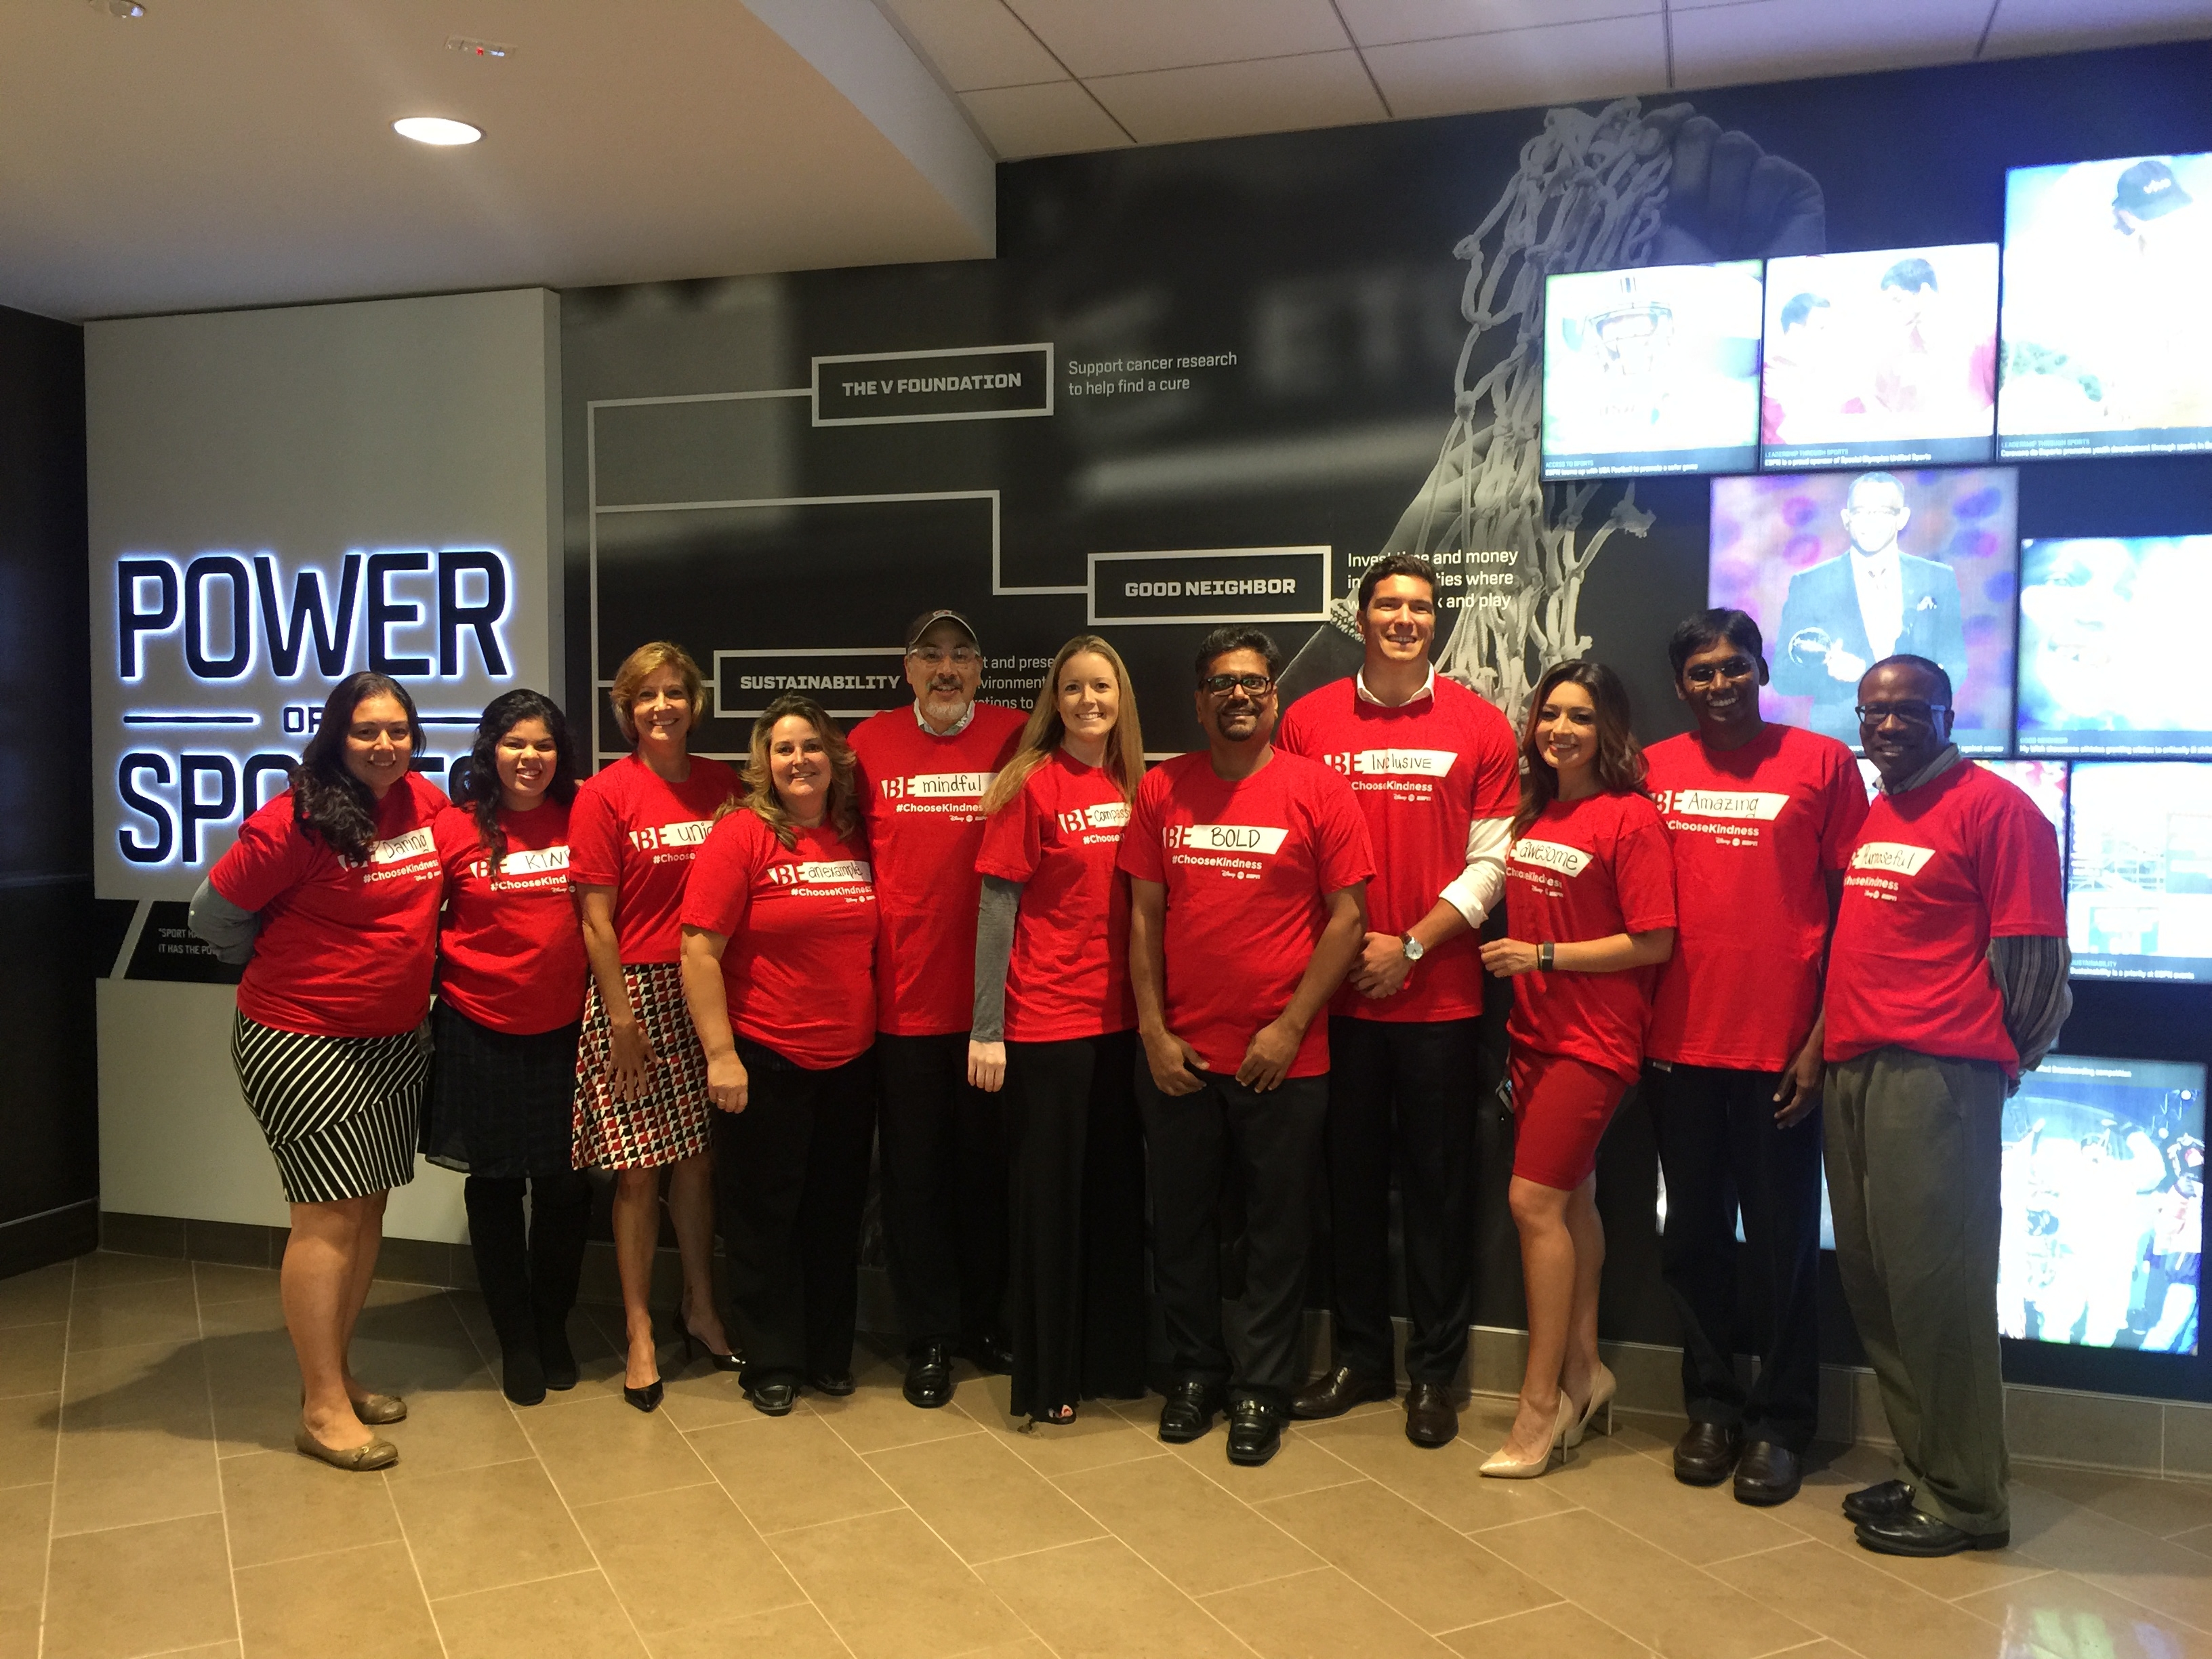 Leaders of ESPN’s Employee Resource Group, along with reporters Will Reeve and Toni Collins, unite against bullying. (Photo courtesy Jennifer Paulett)